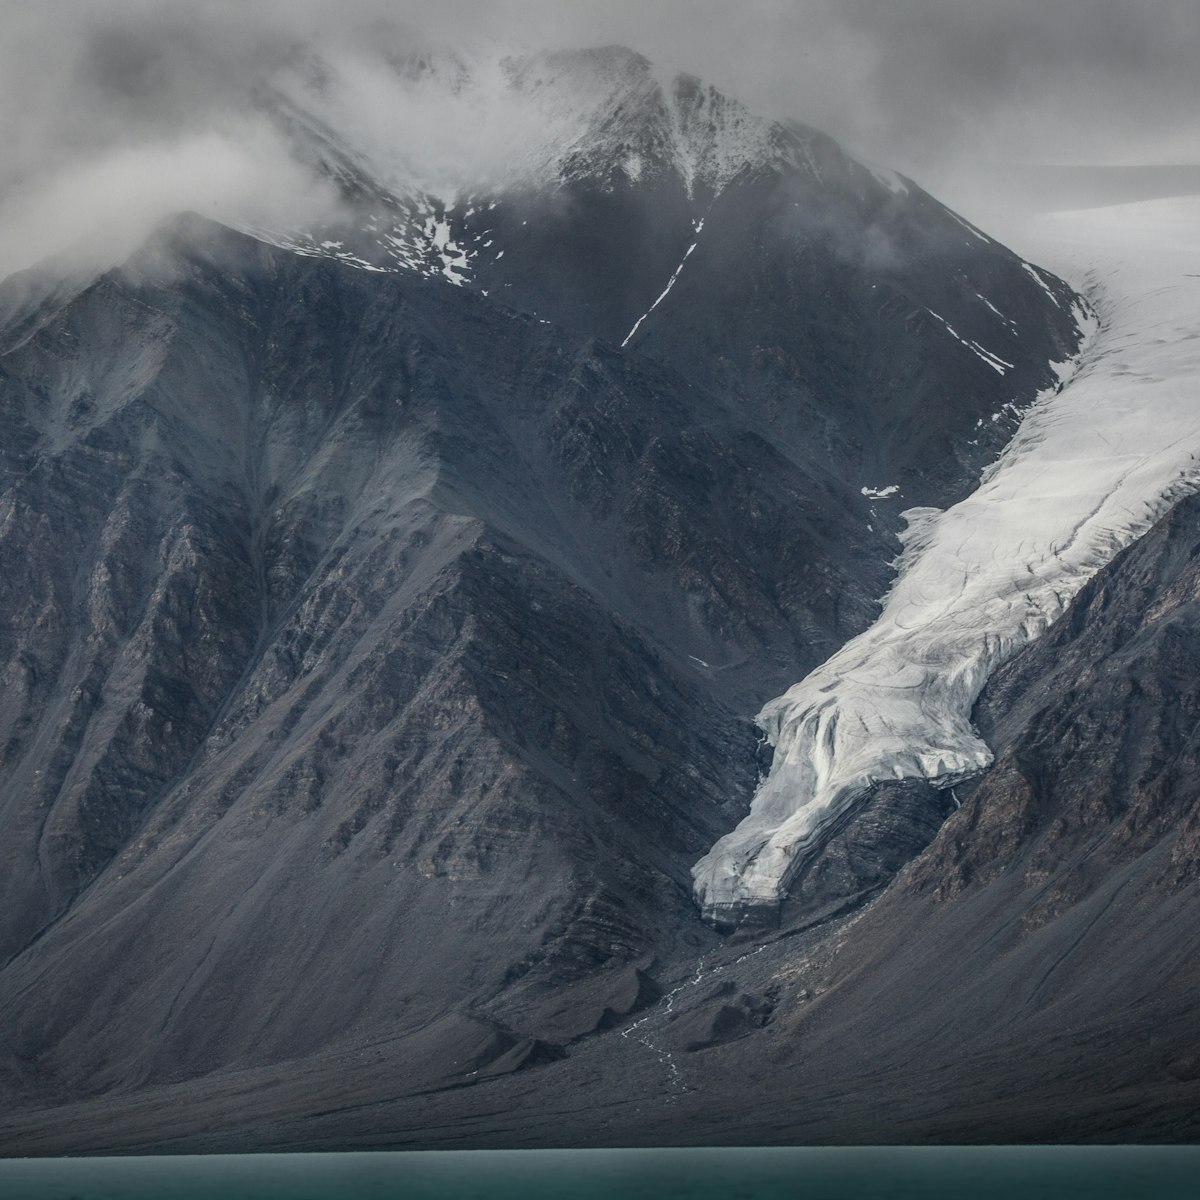 A hanging glacier in Tanquary Fiord, Quittinirpaaq National Park, Ellesmere Island Nunavut.
856800746